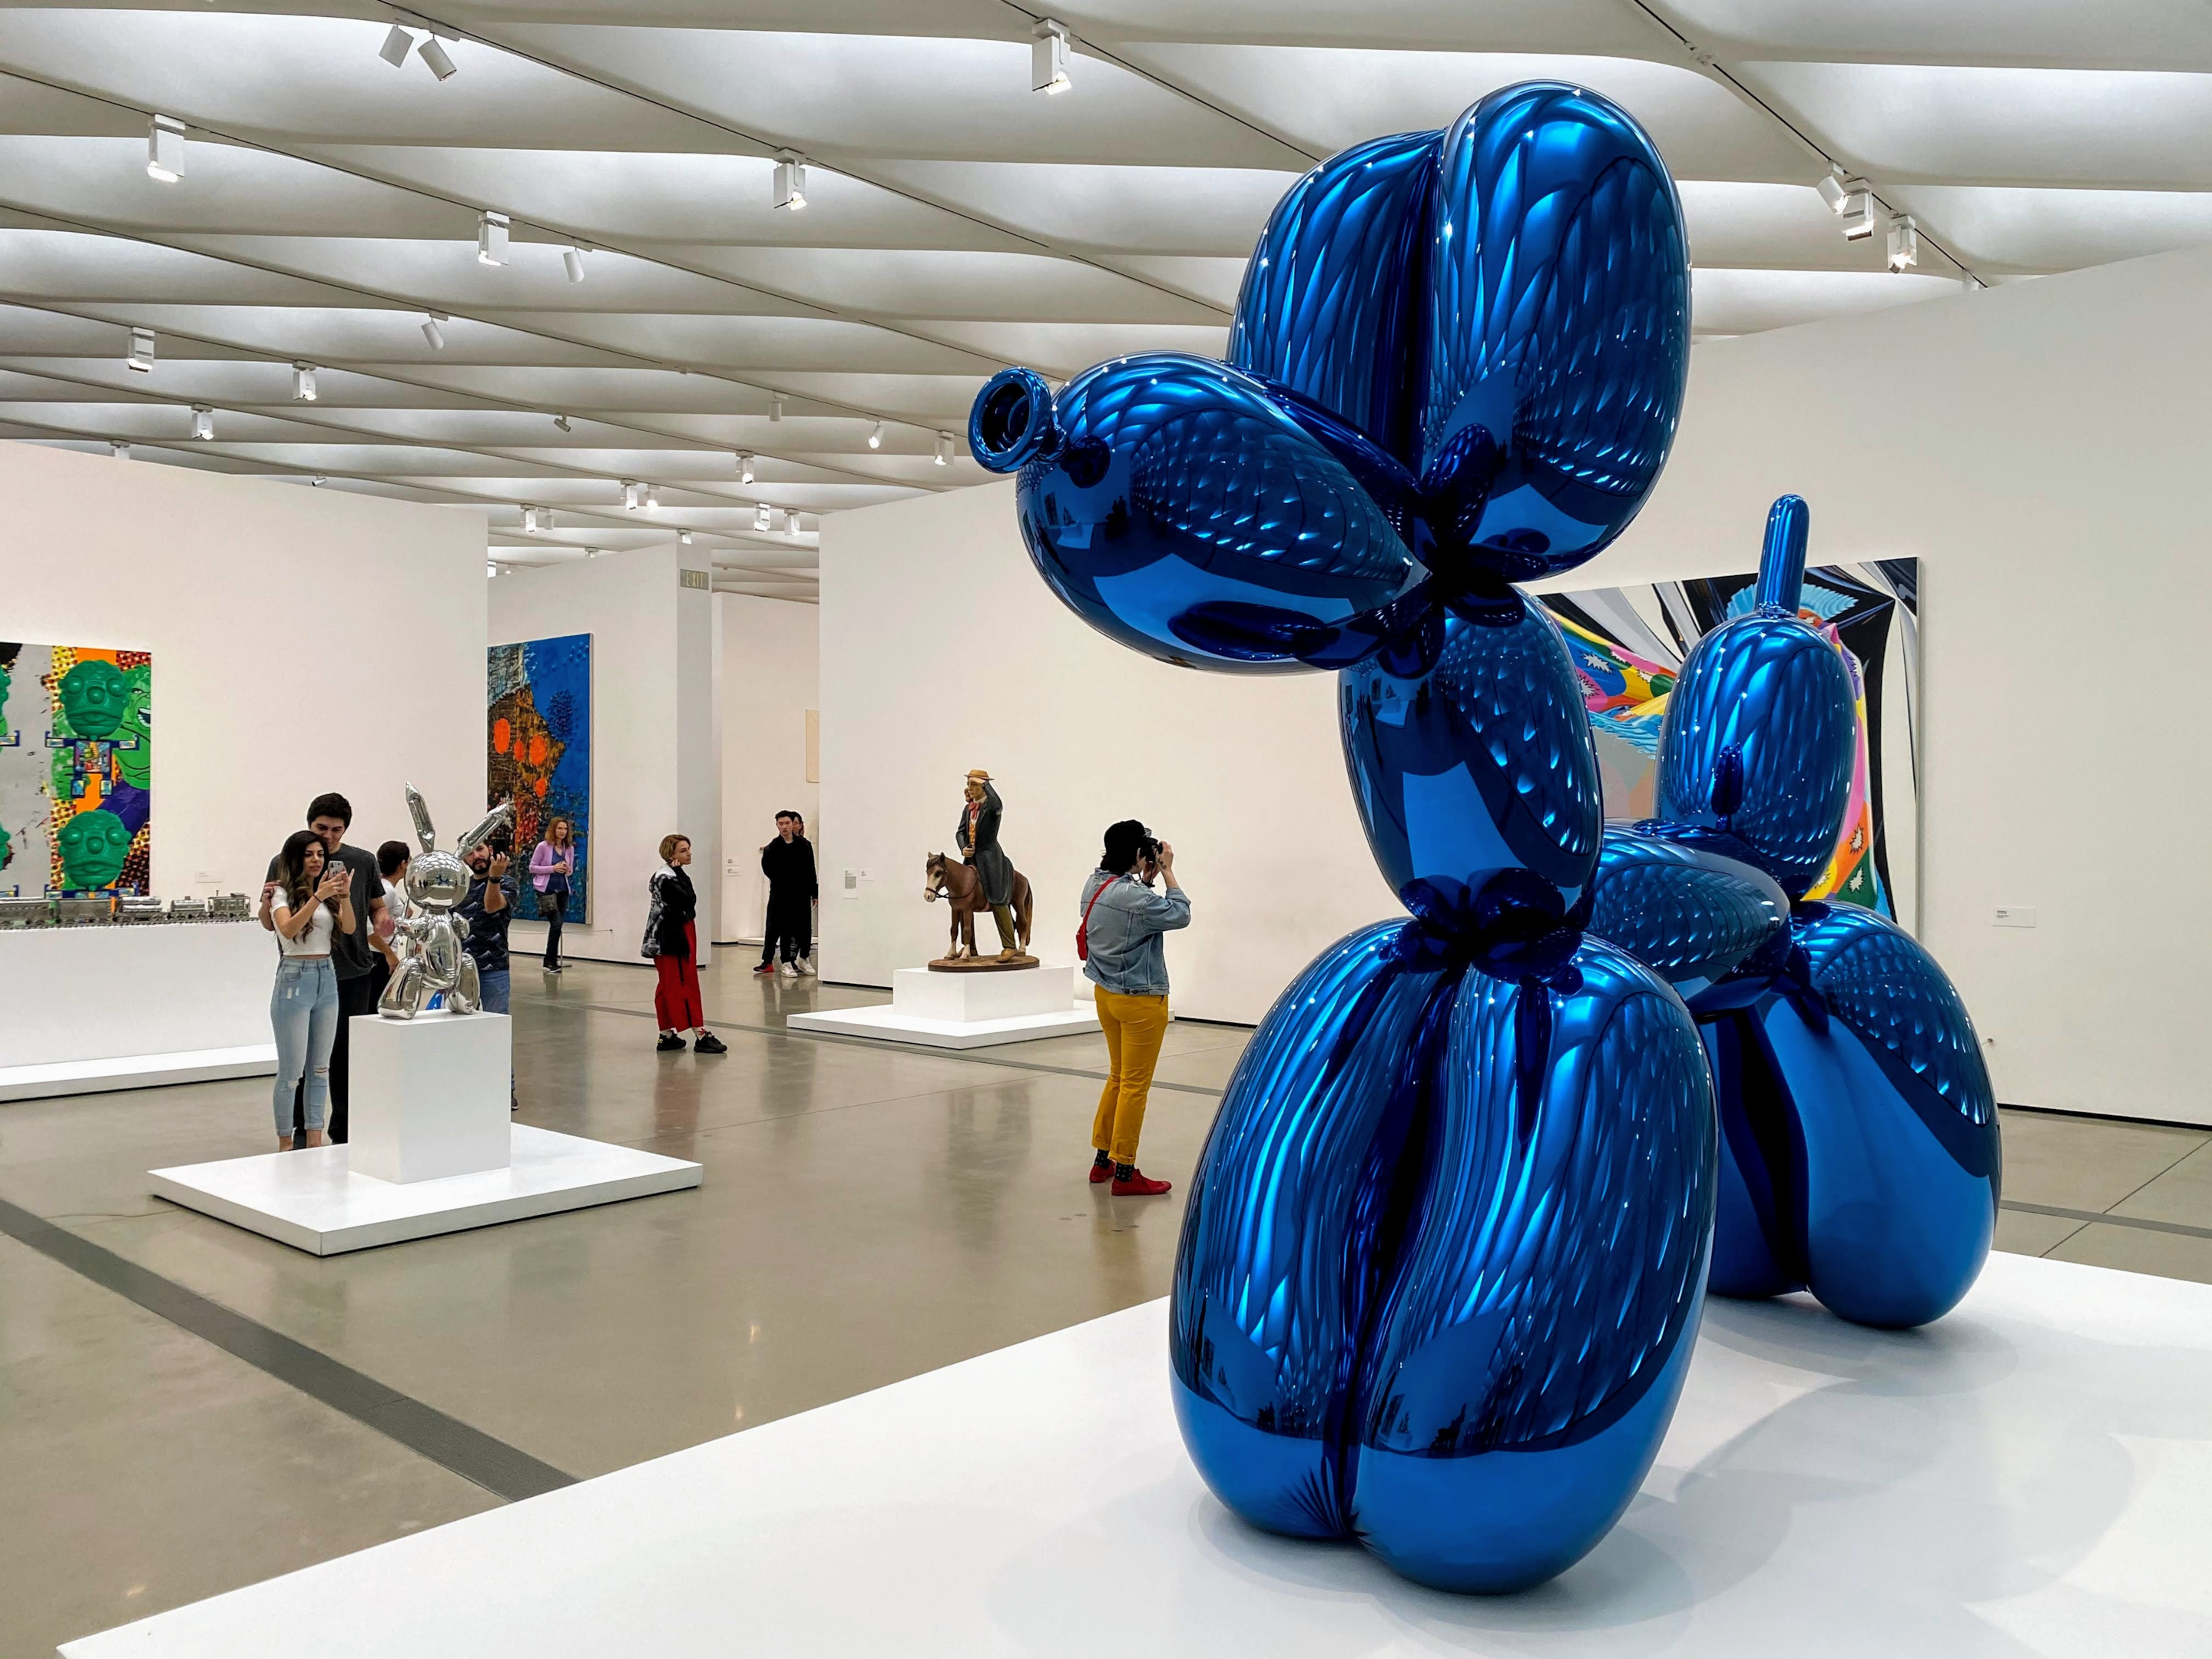 Jeff Koons art display at The Broad in Los Angeles. Photo by Roberto Contrero